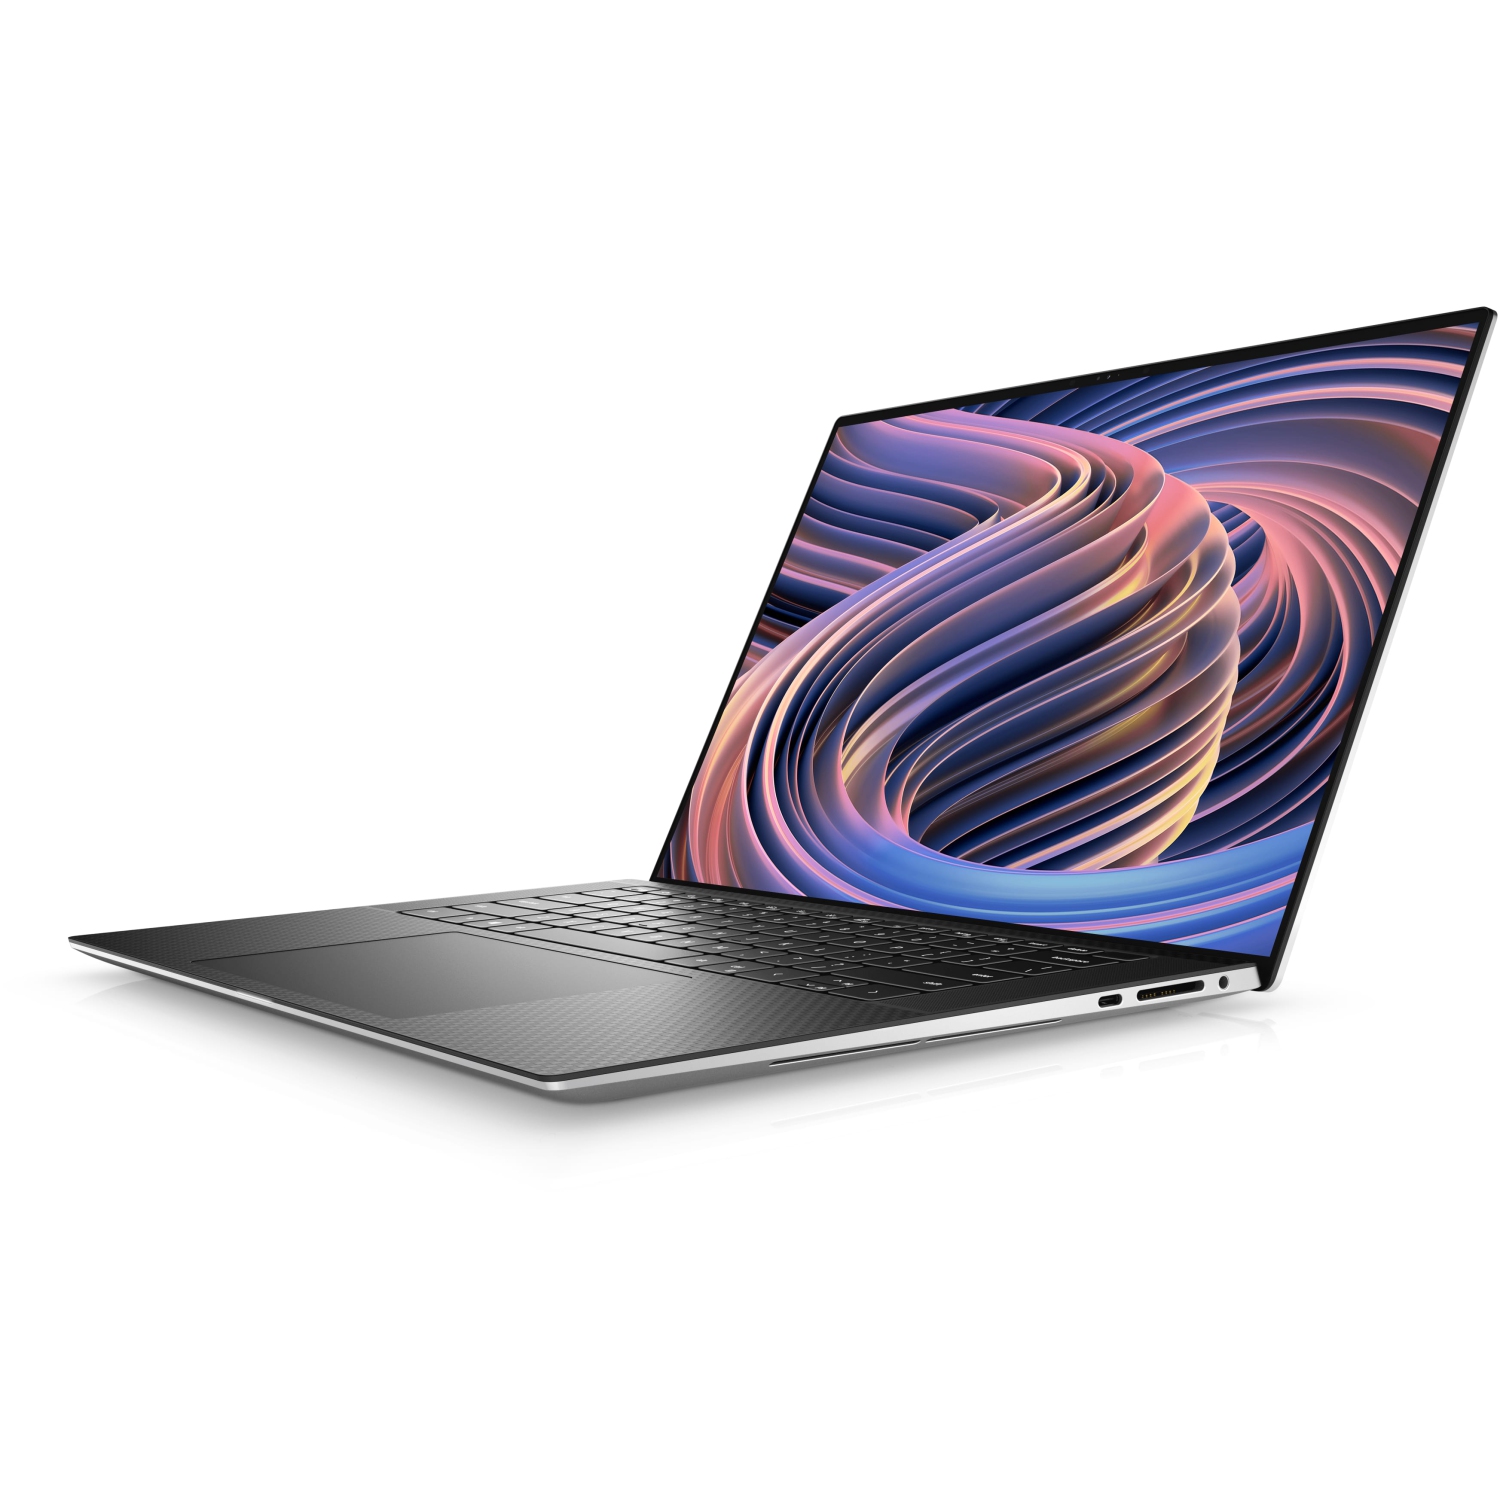 Refurbished (Excellent) – Dell XPS 9520 Laptop (2022) | 15.6" FHD+ | Core i7 - 1TB SSD - 64GB RAM - RTX 3050 | 14 Cores @ 4.7 GHz - 12th Gen CPU